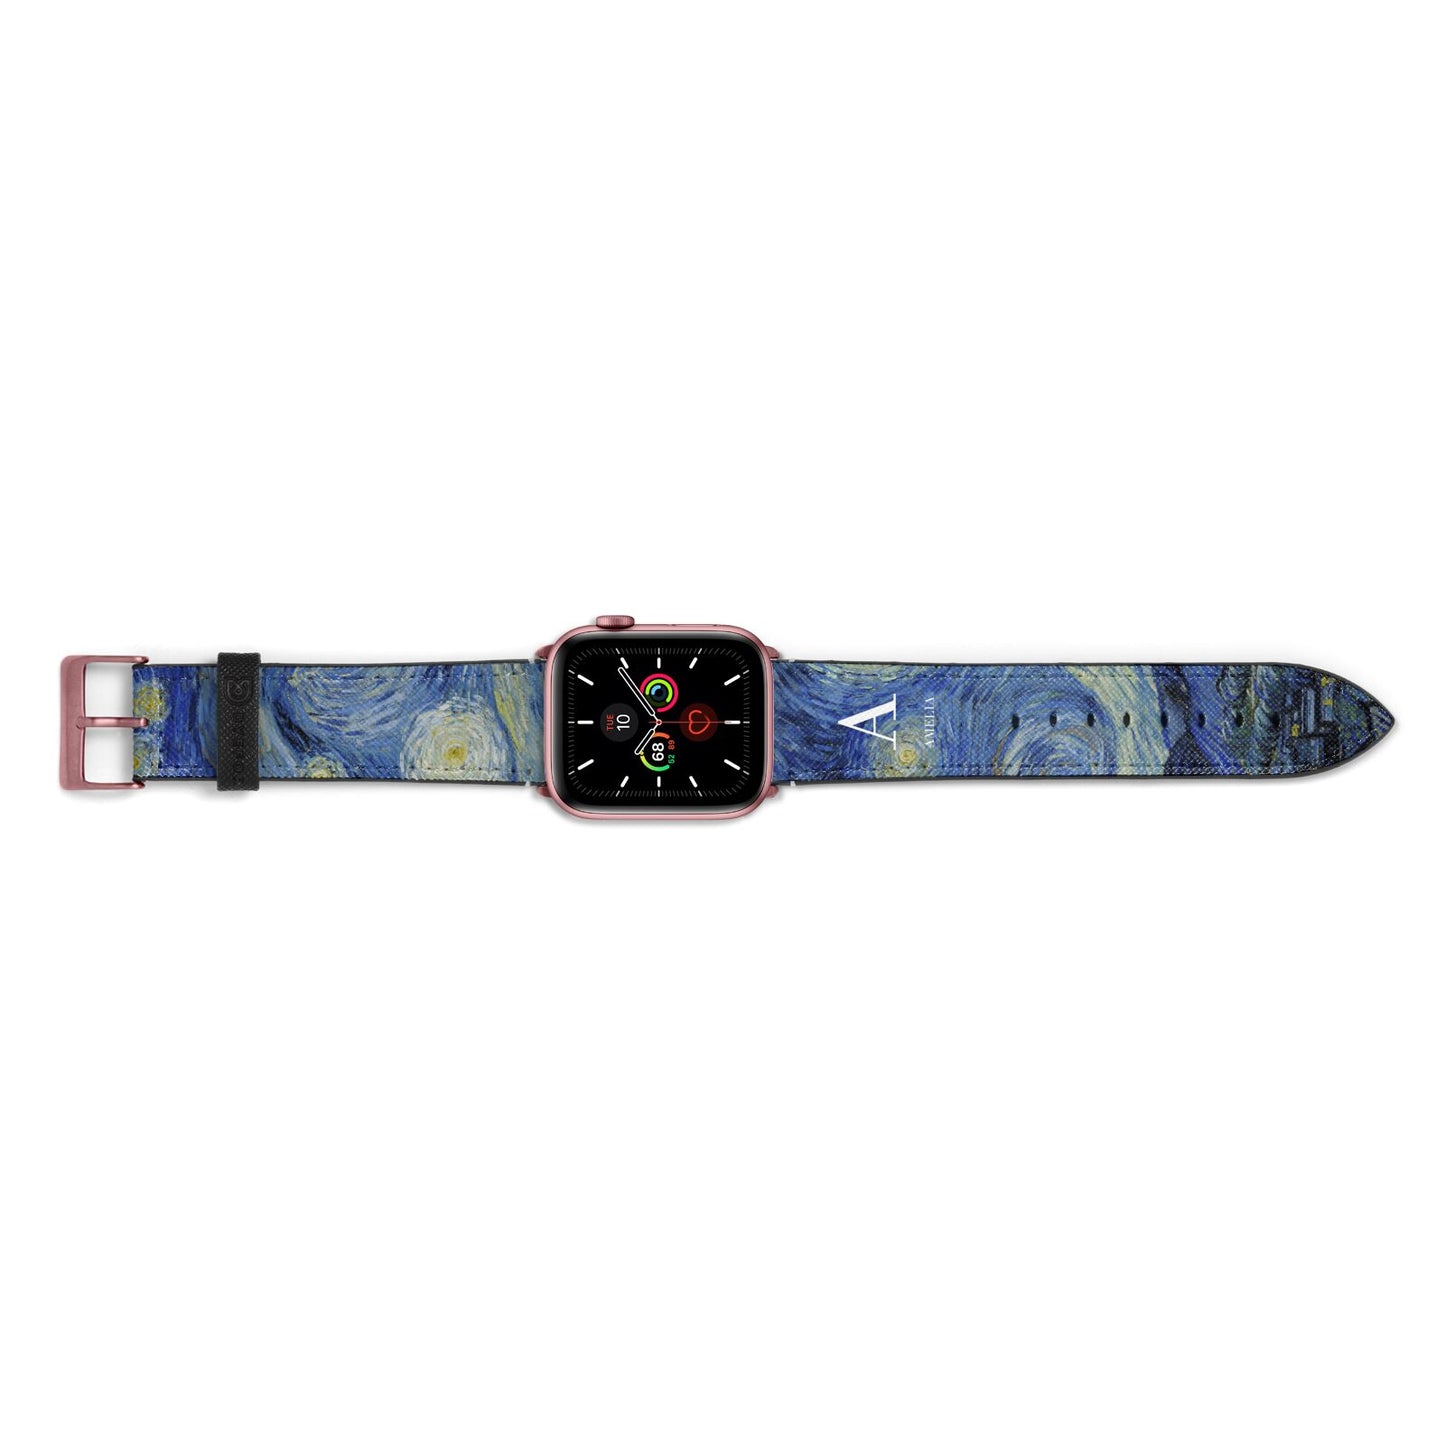 Personalised Van Gogh Starry Night Apple Watch Strap Landscape Image Rose Gold Hardware